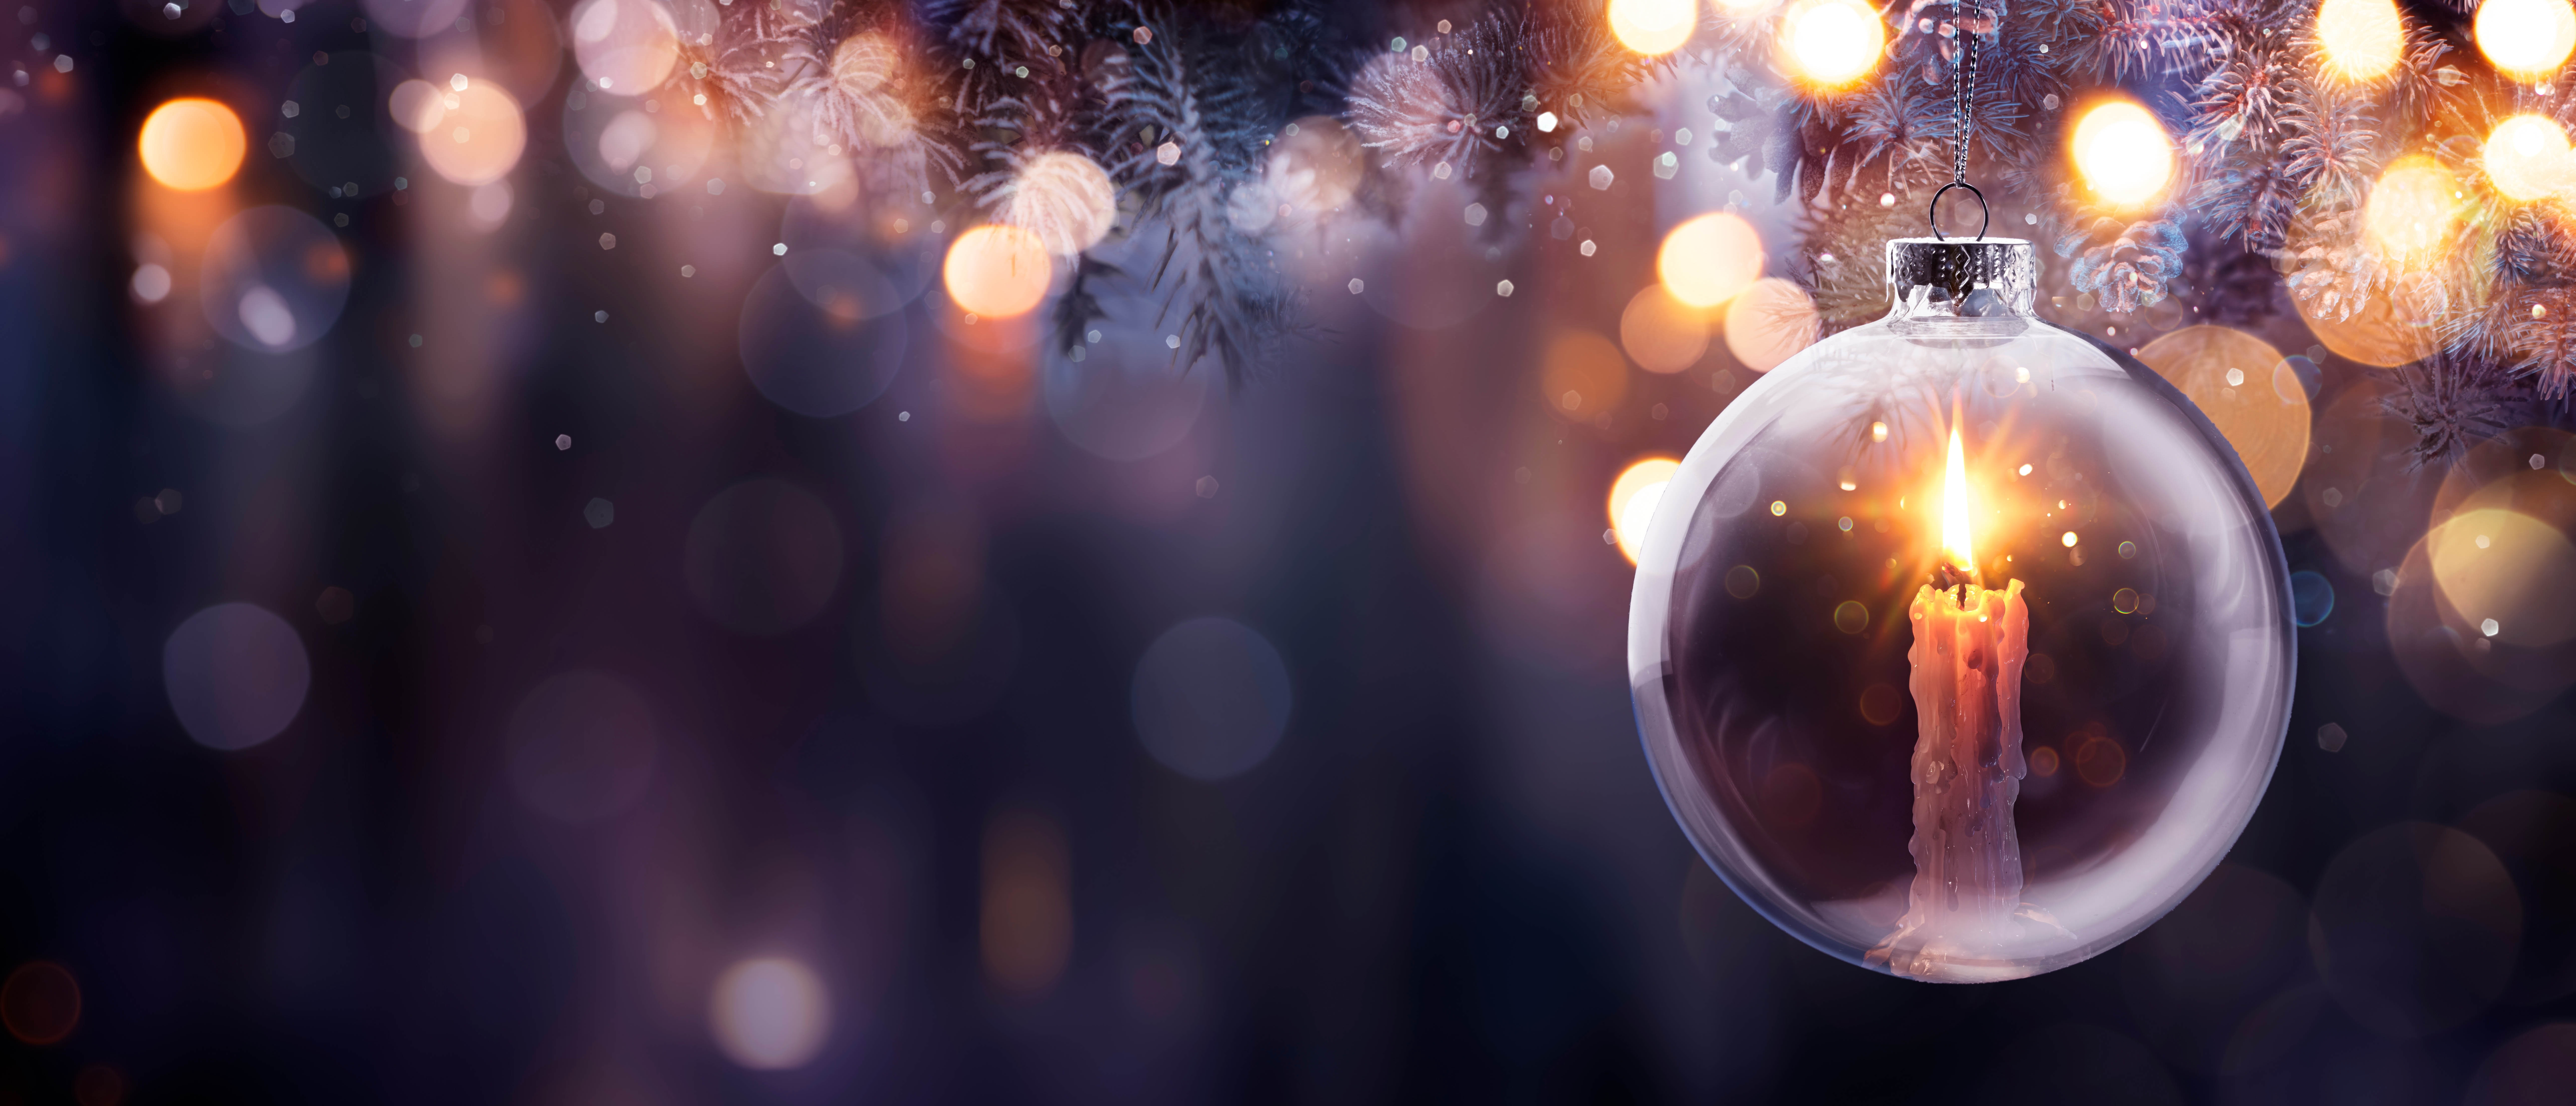 A Christmas ball with a candle inside hanging from a Christmas tree, lights in the background